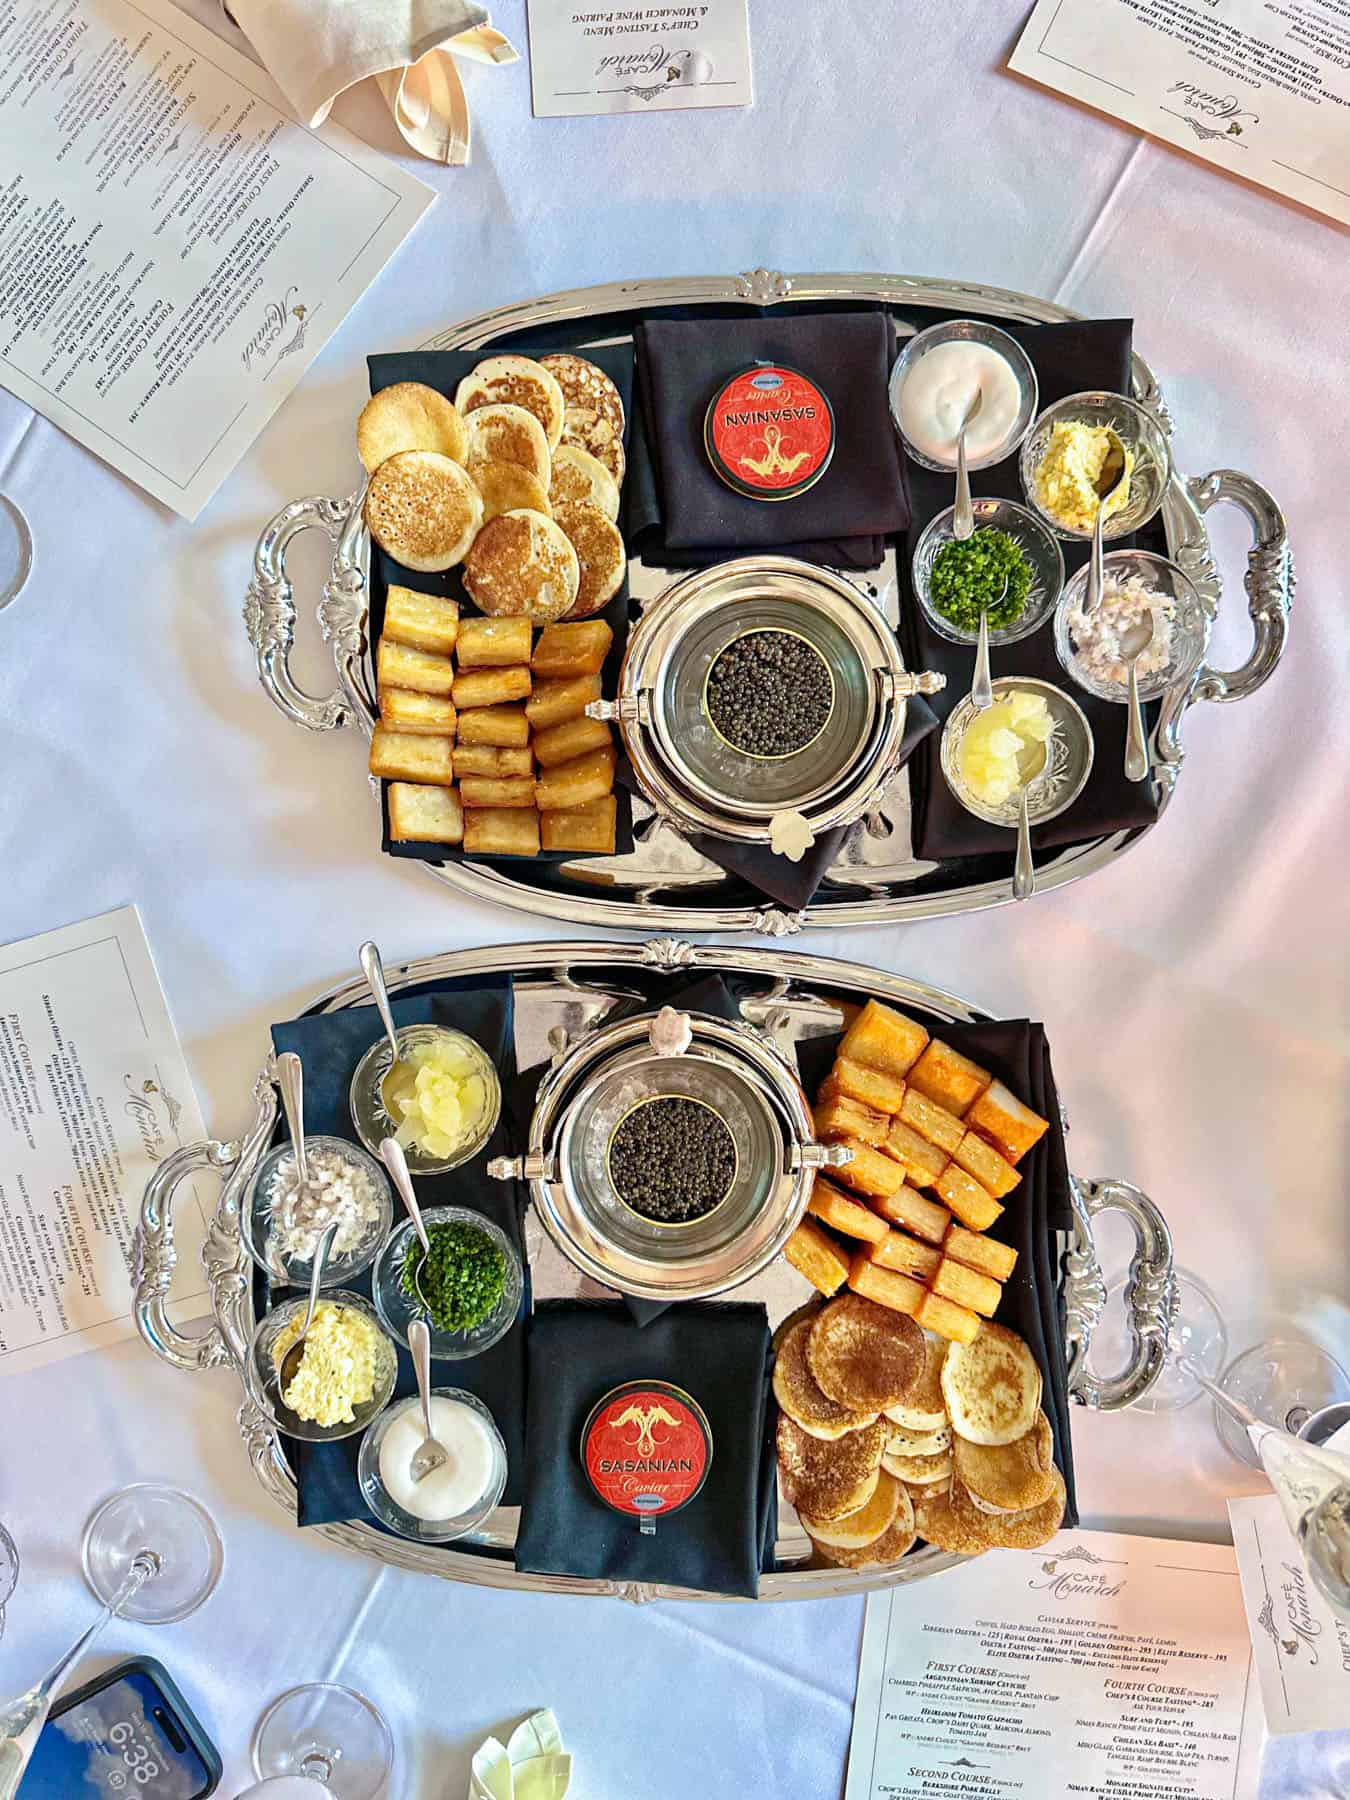 two trays with caviar and side dishes on a white linen table at Cafe Monarch in Scottsdale AZ.